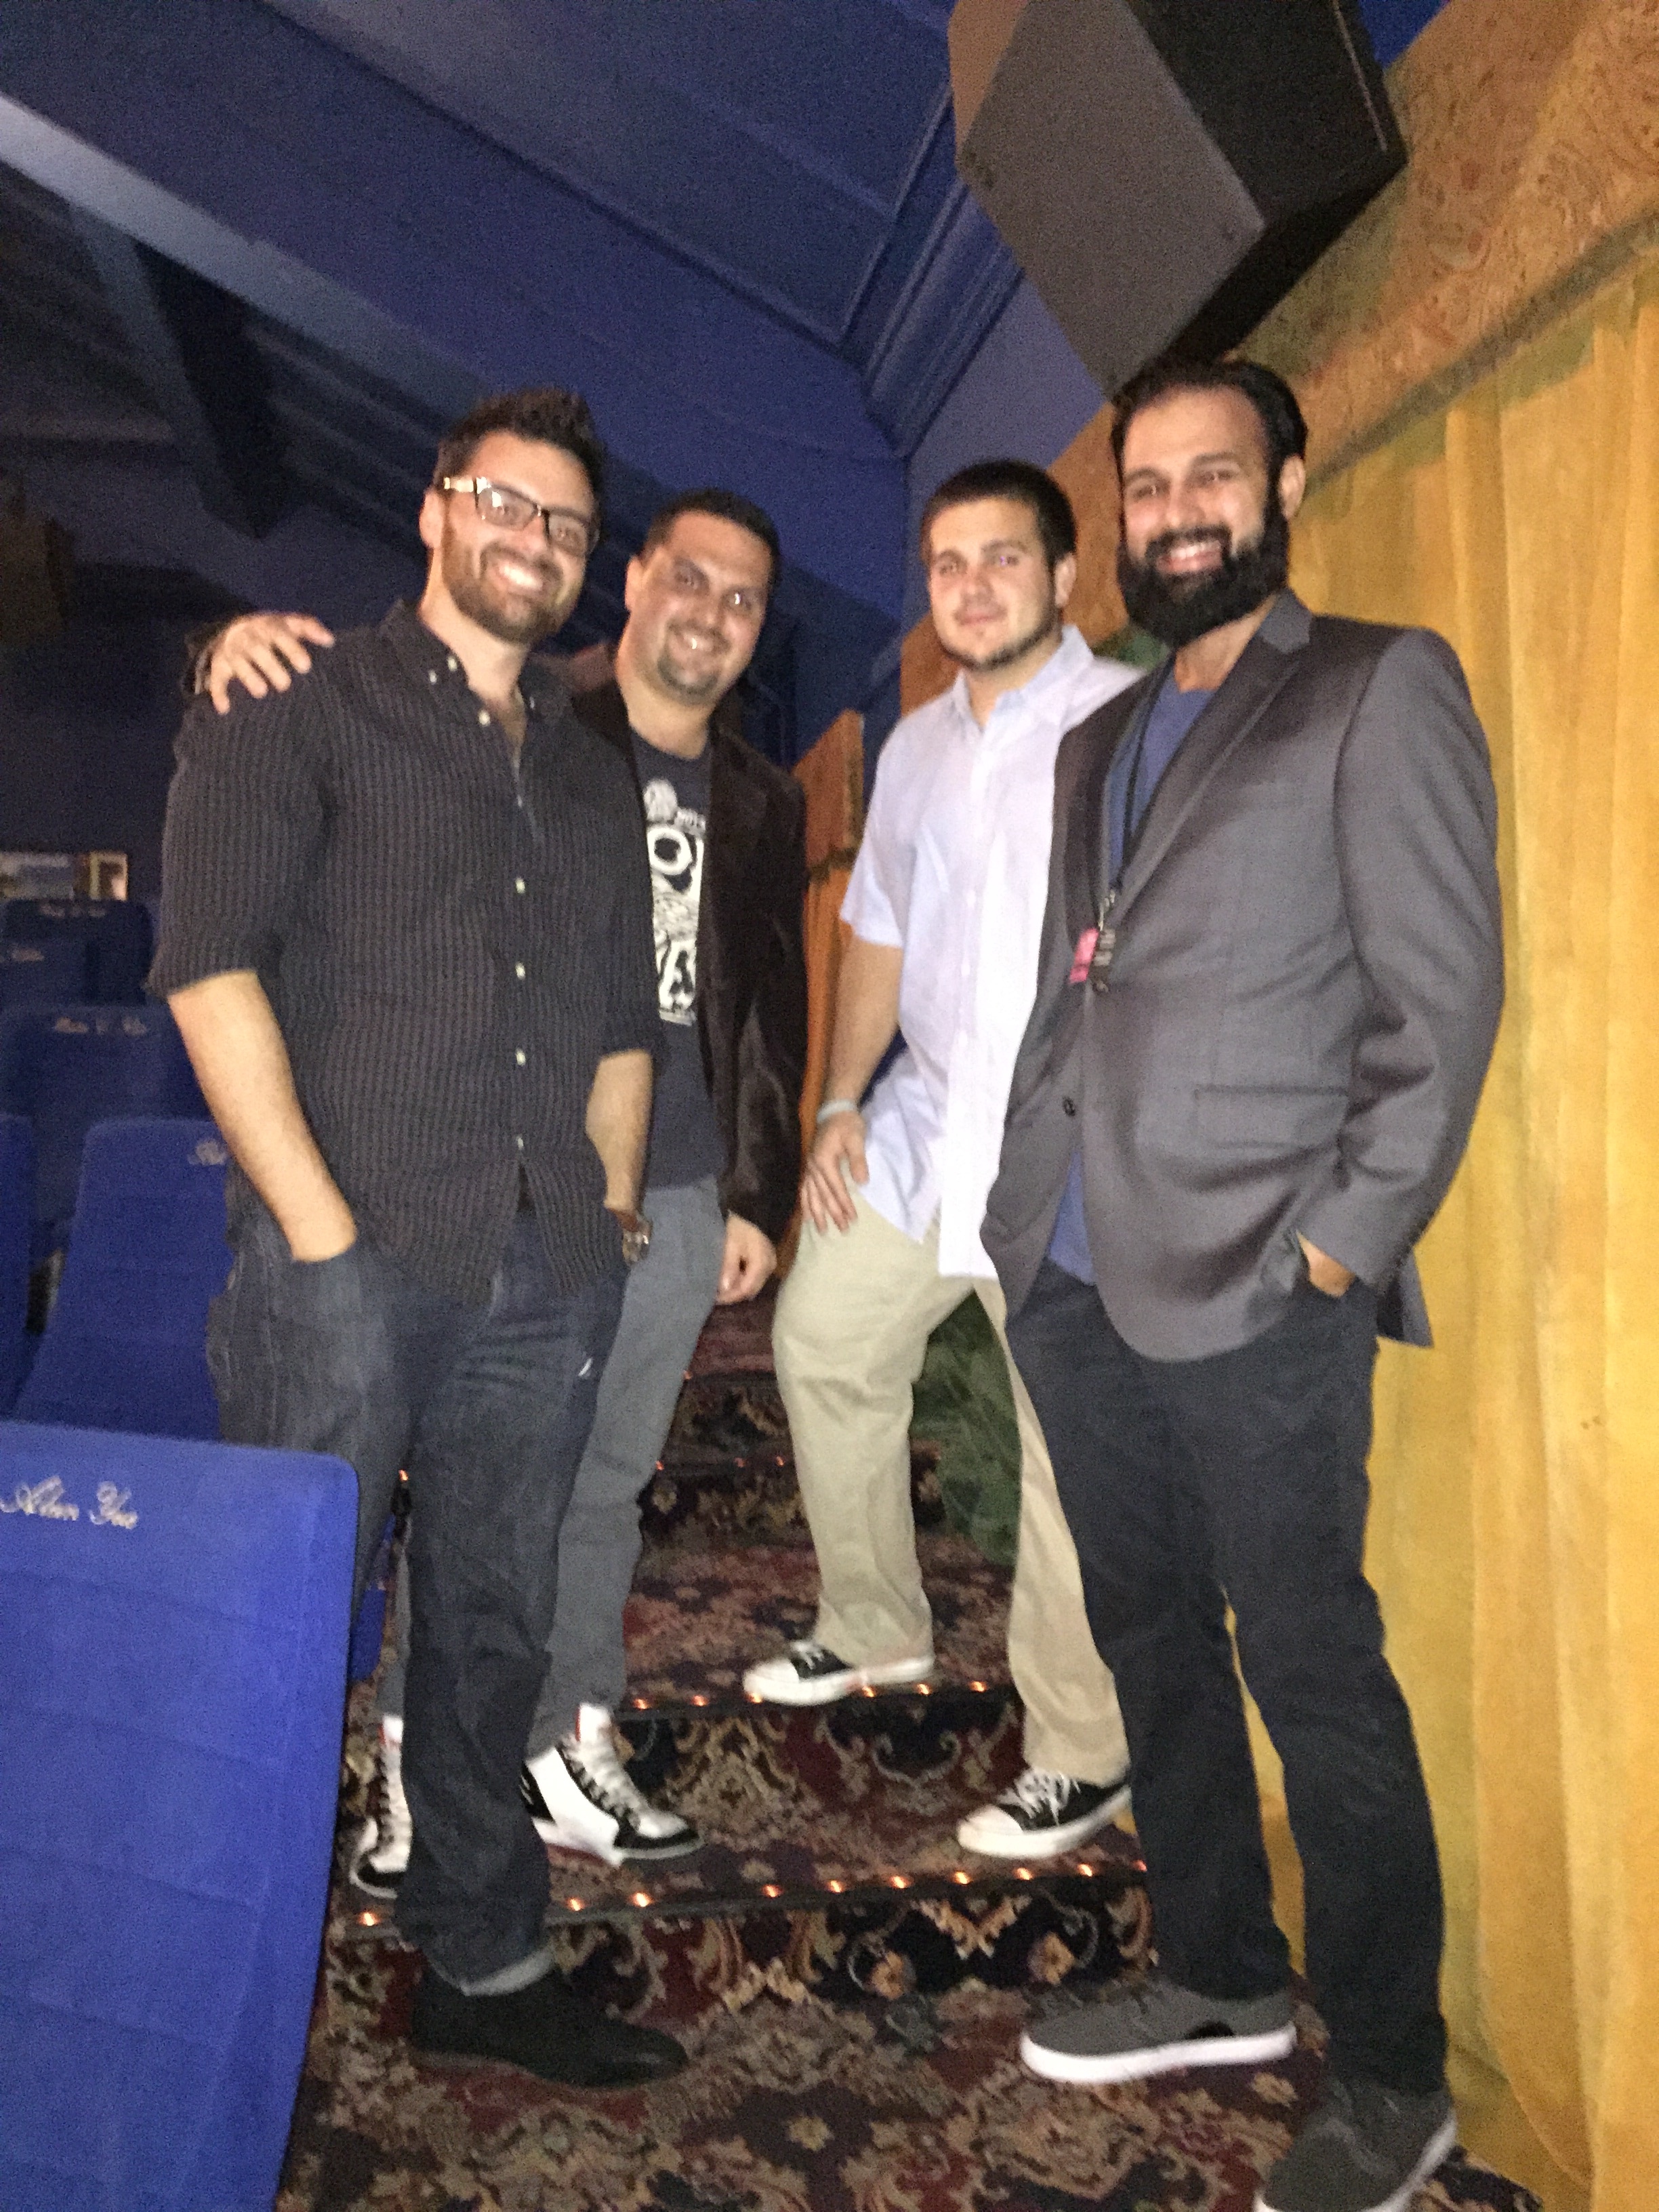 Writer/Director David Rebollar with the cast of Hold the Cuckoo, Pablo A. Suarez, Michael Martinez, and Joel Marrero, for the world premiere at Cinema Paradiso Fort Lauderdale for the Fort Lauderdale International Film Festival.